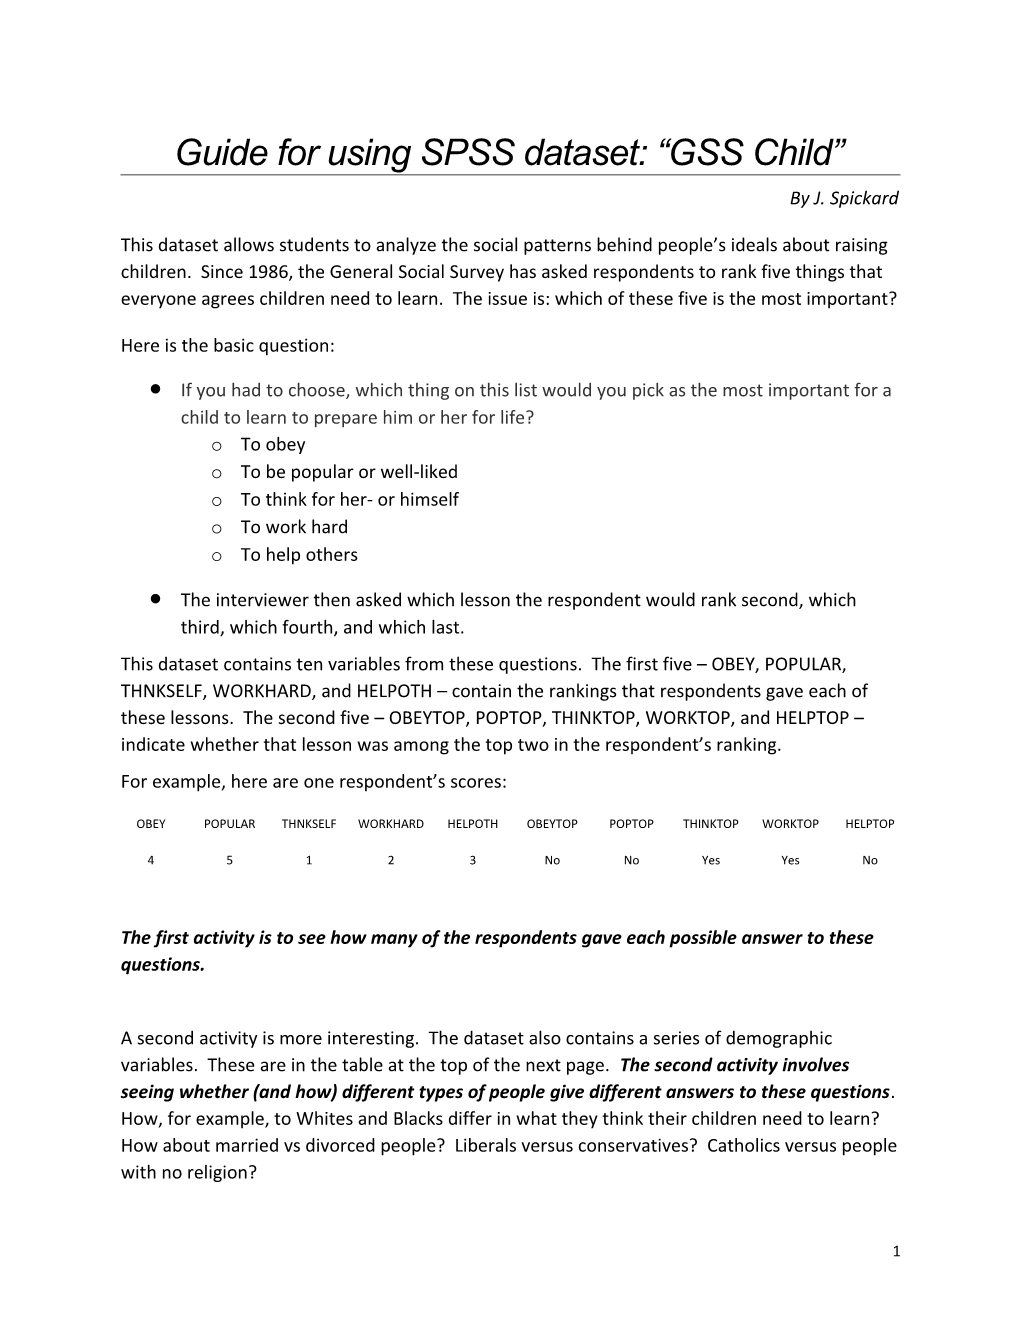 Guide for Using SPSS Dataset GSS Child